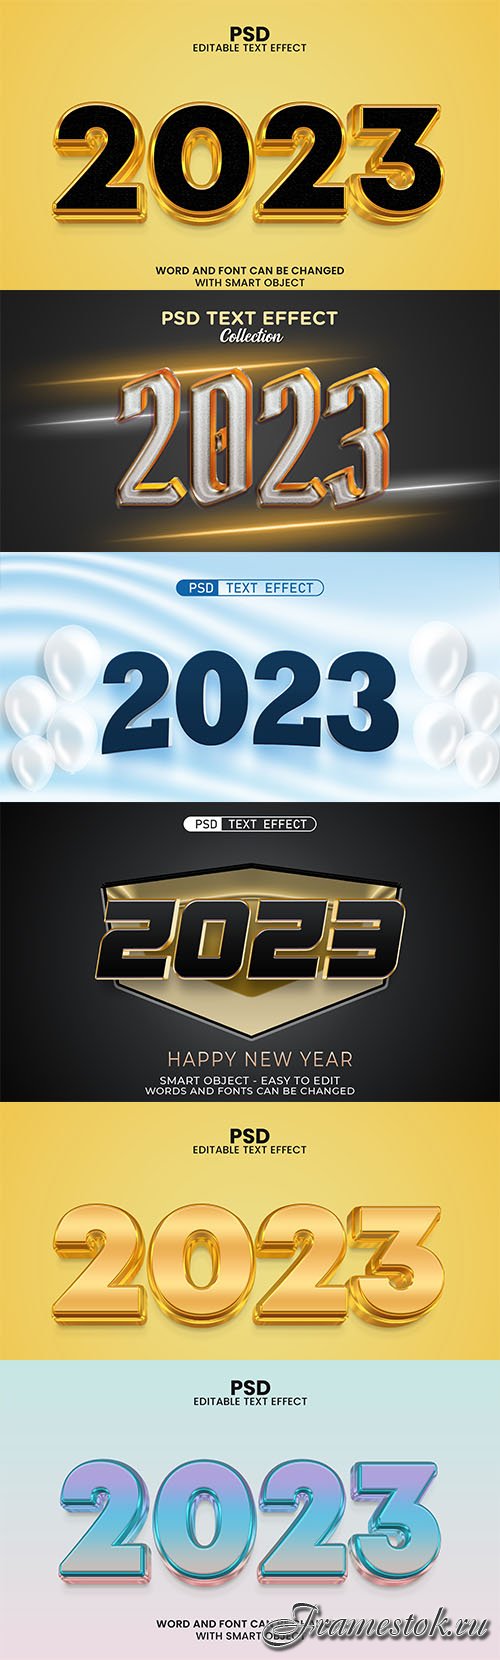 2023 new year golden 3d psd text effect with beautiful background